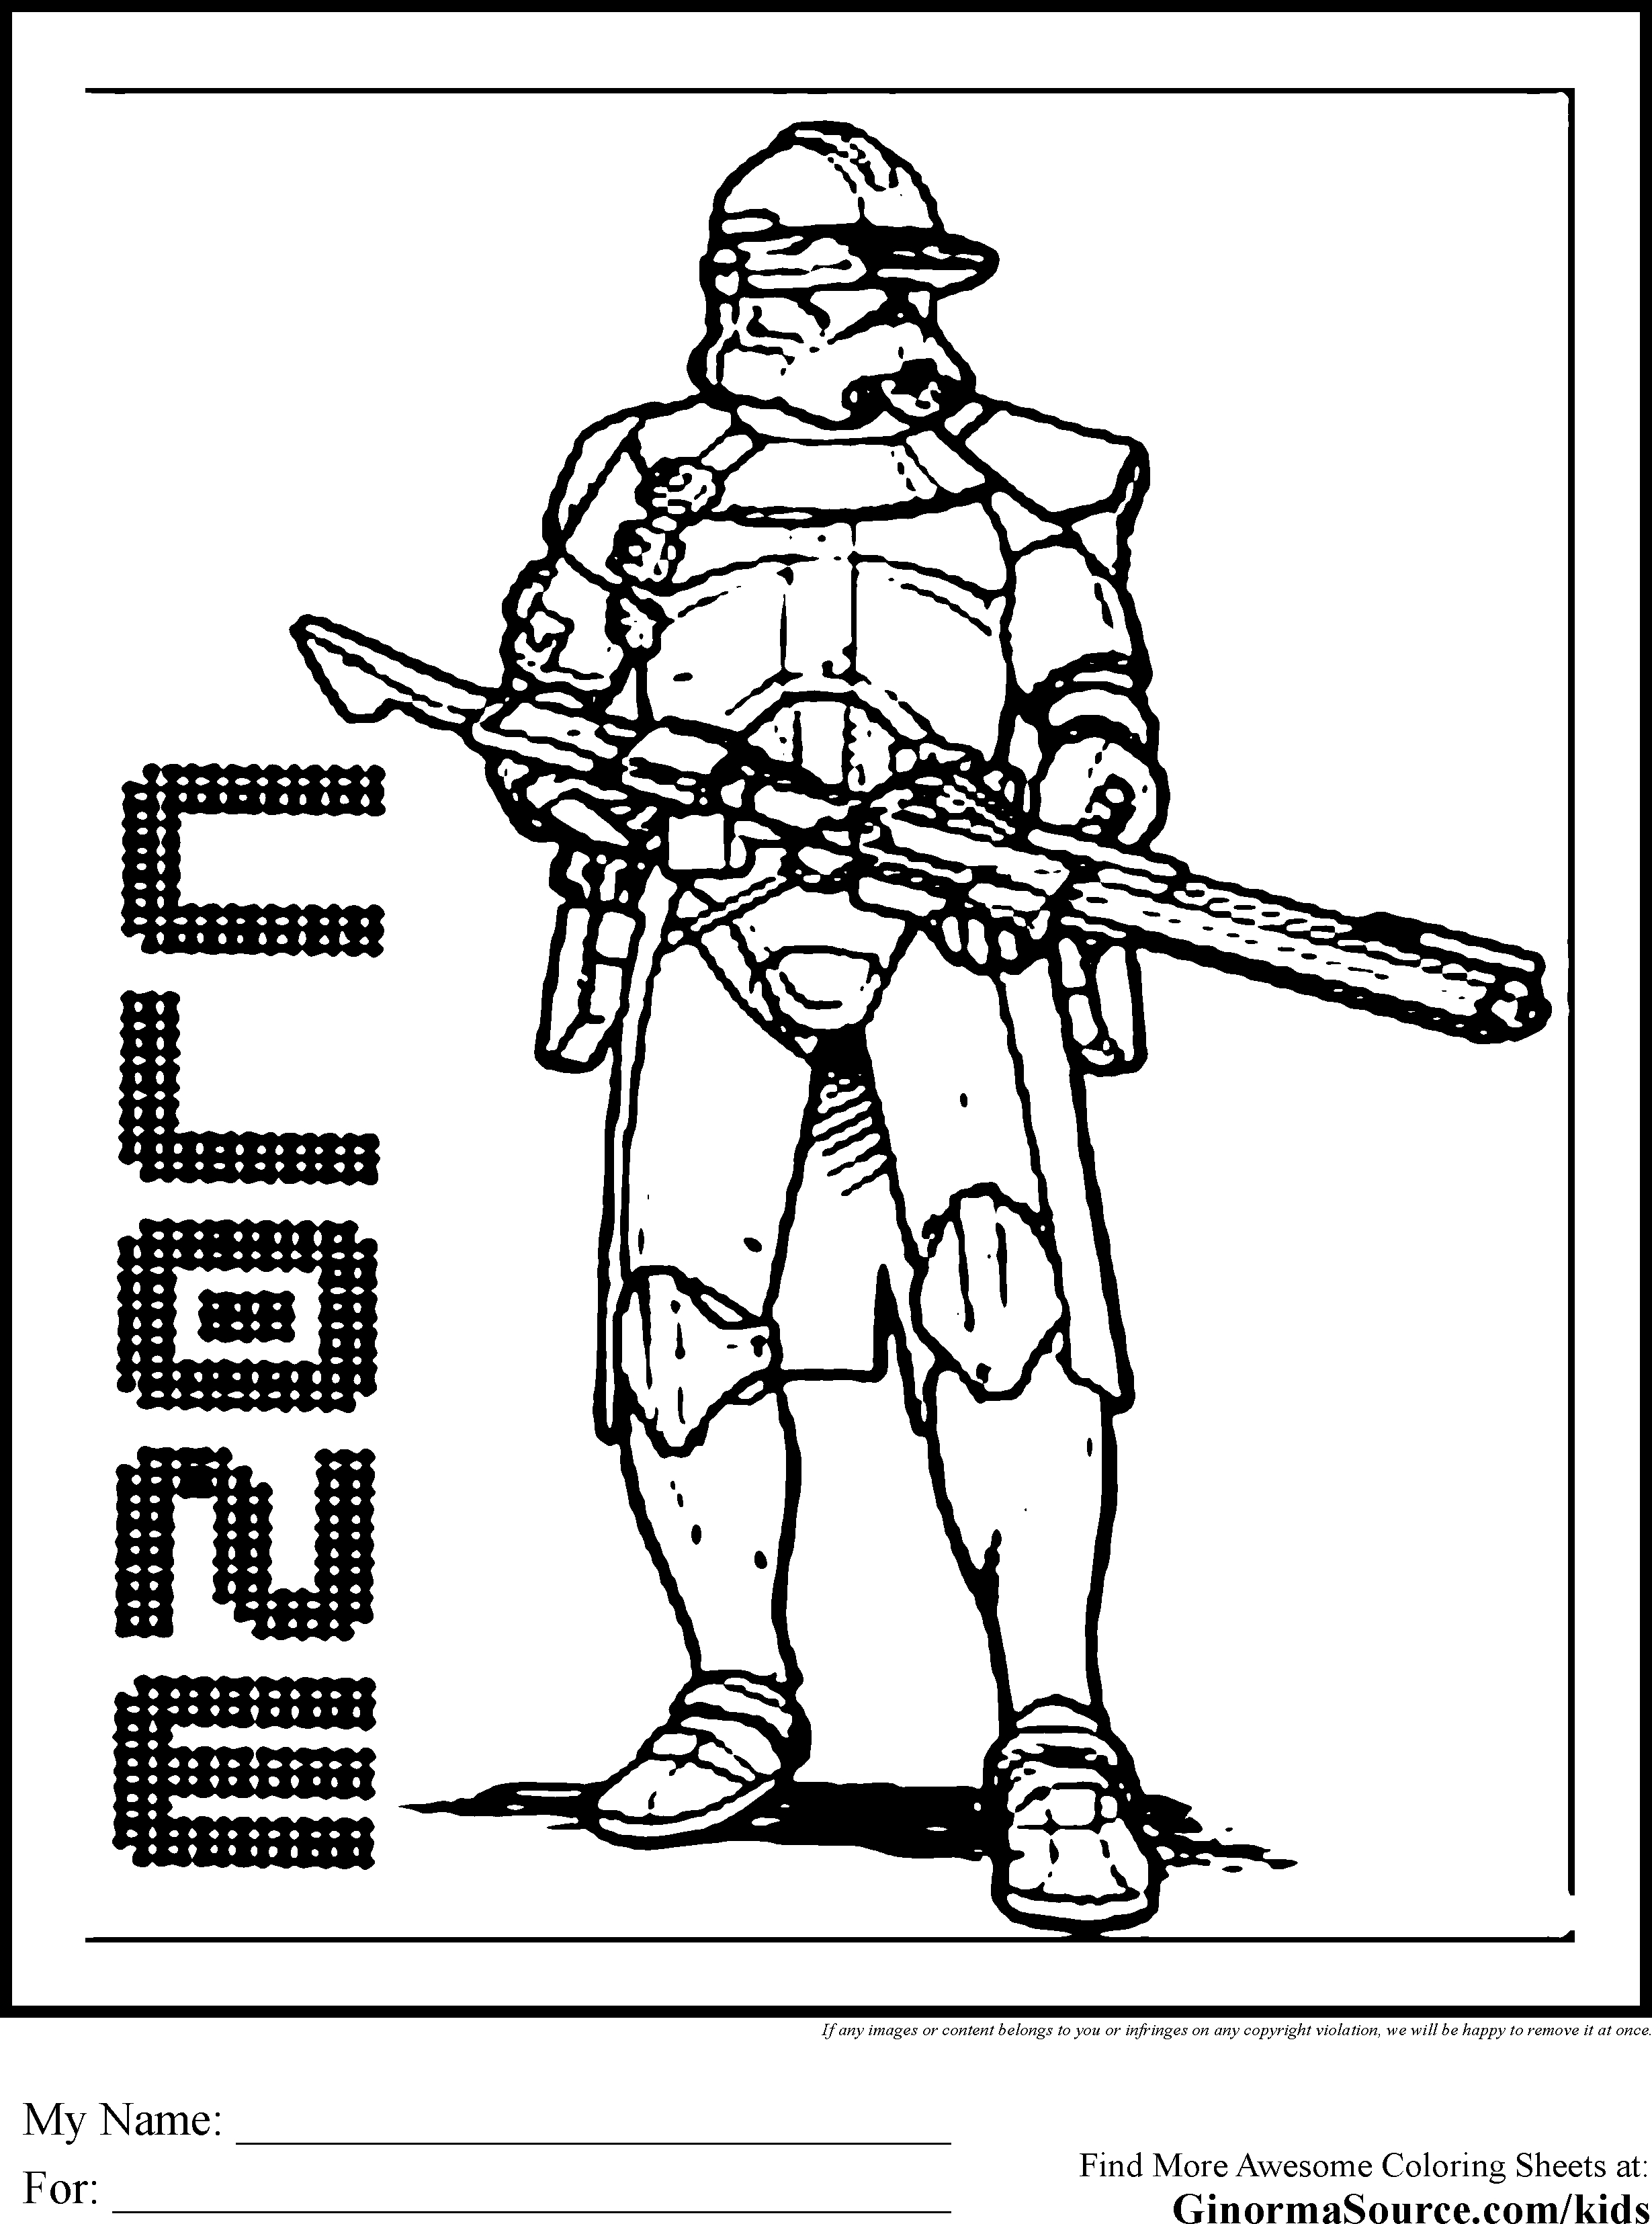 Star Wars Clone Wars Coloring Pages | Coloring Pages For Free - Free Printable Star Wars Coloring Pages